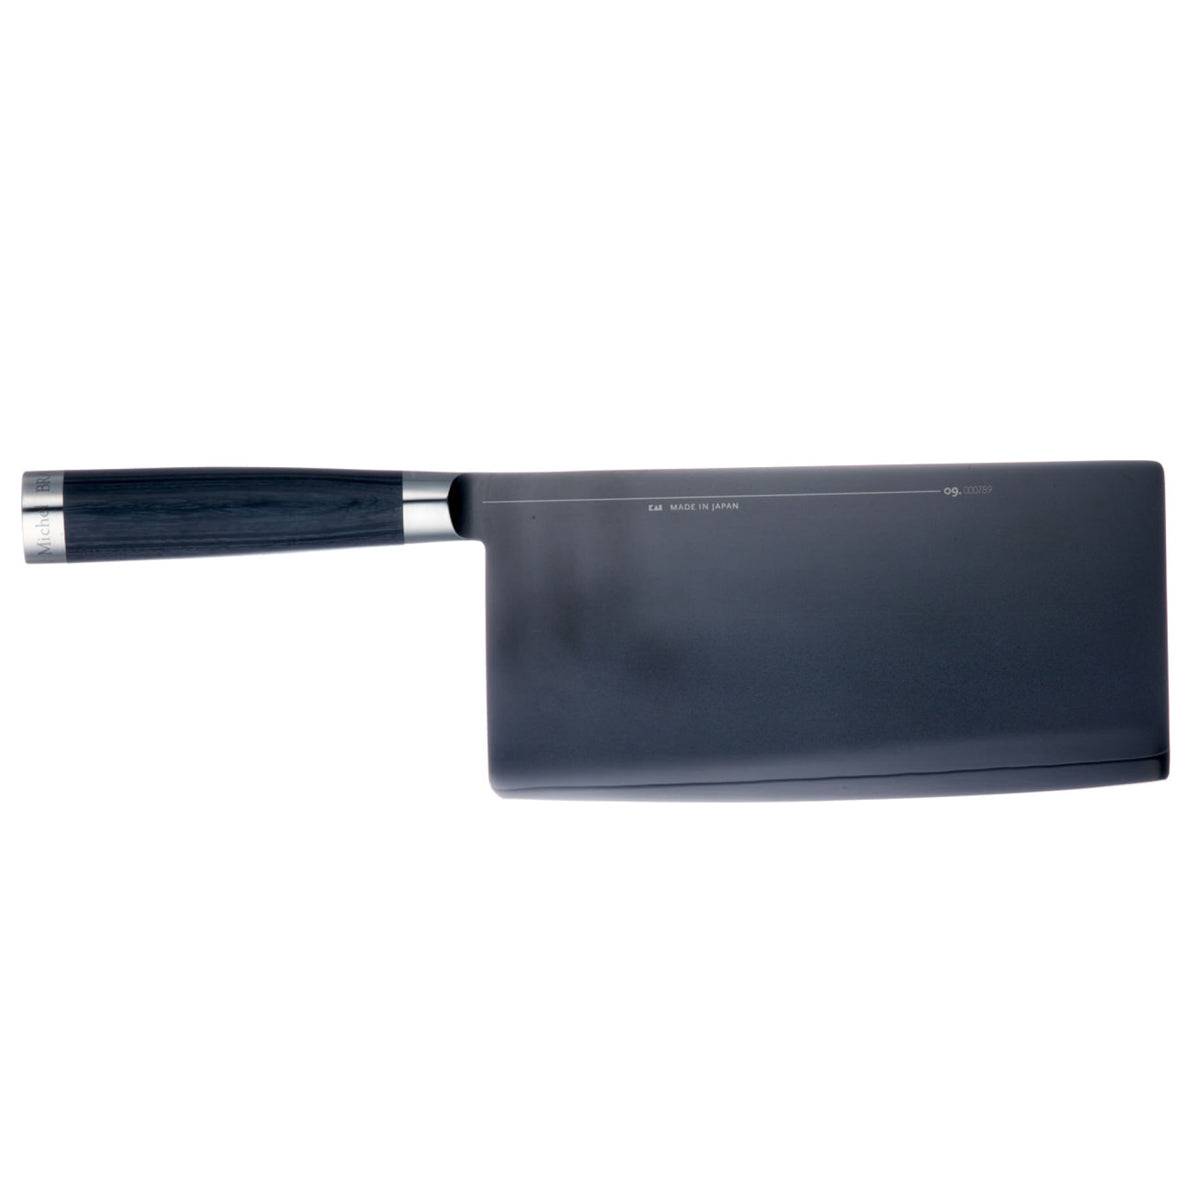 Image of ID 932742032 Michel Bras #10 Cleaver Knife 775-in